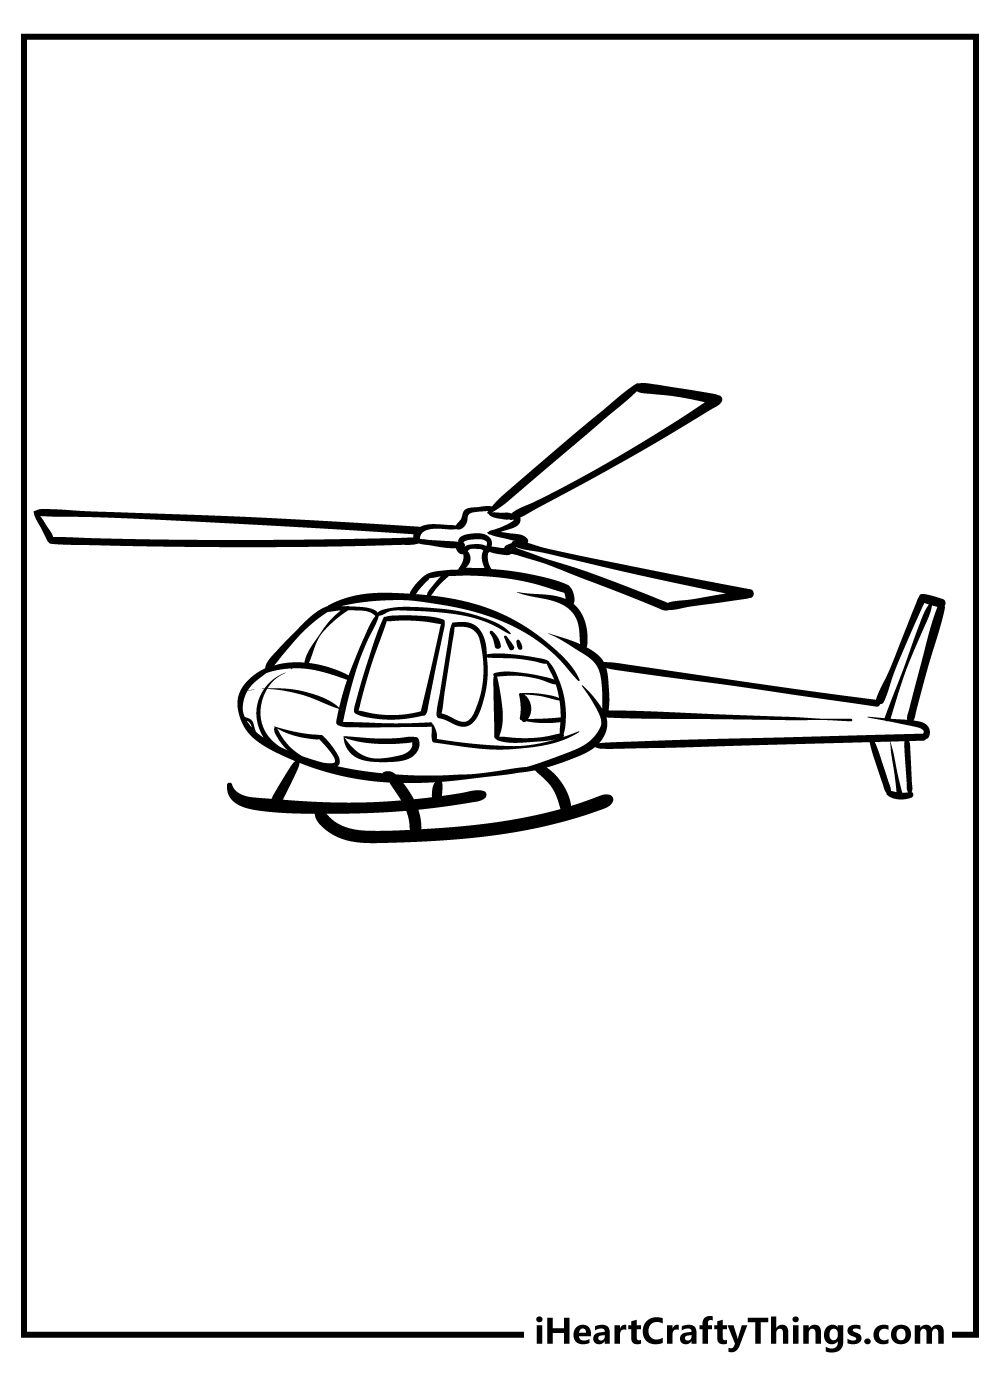 Helicopter Coloring Book for kids free printable